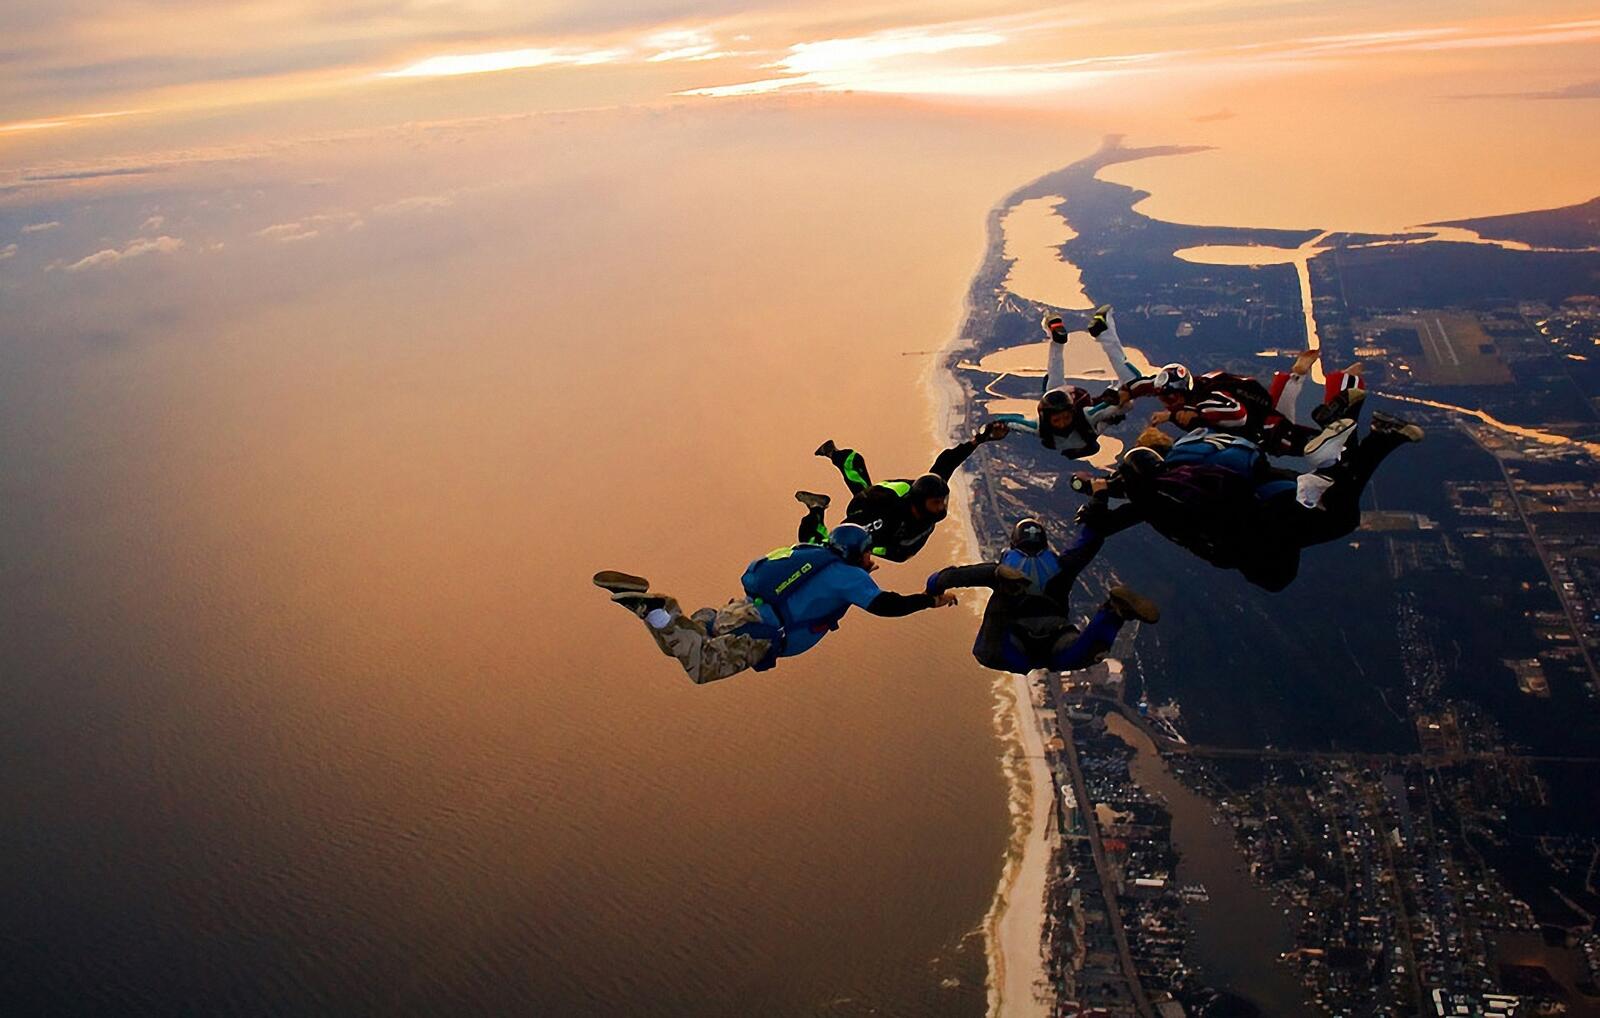 Wallpapers skydivers jump ring on the desktop